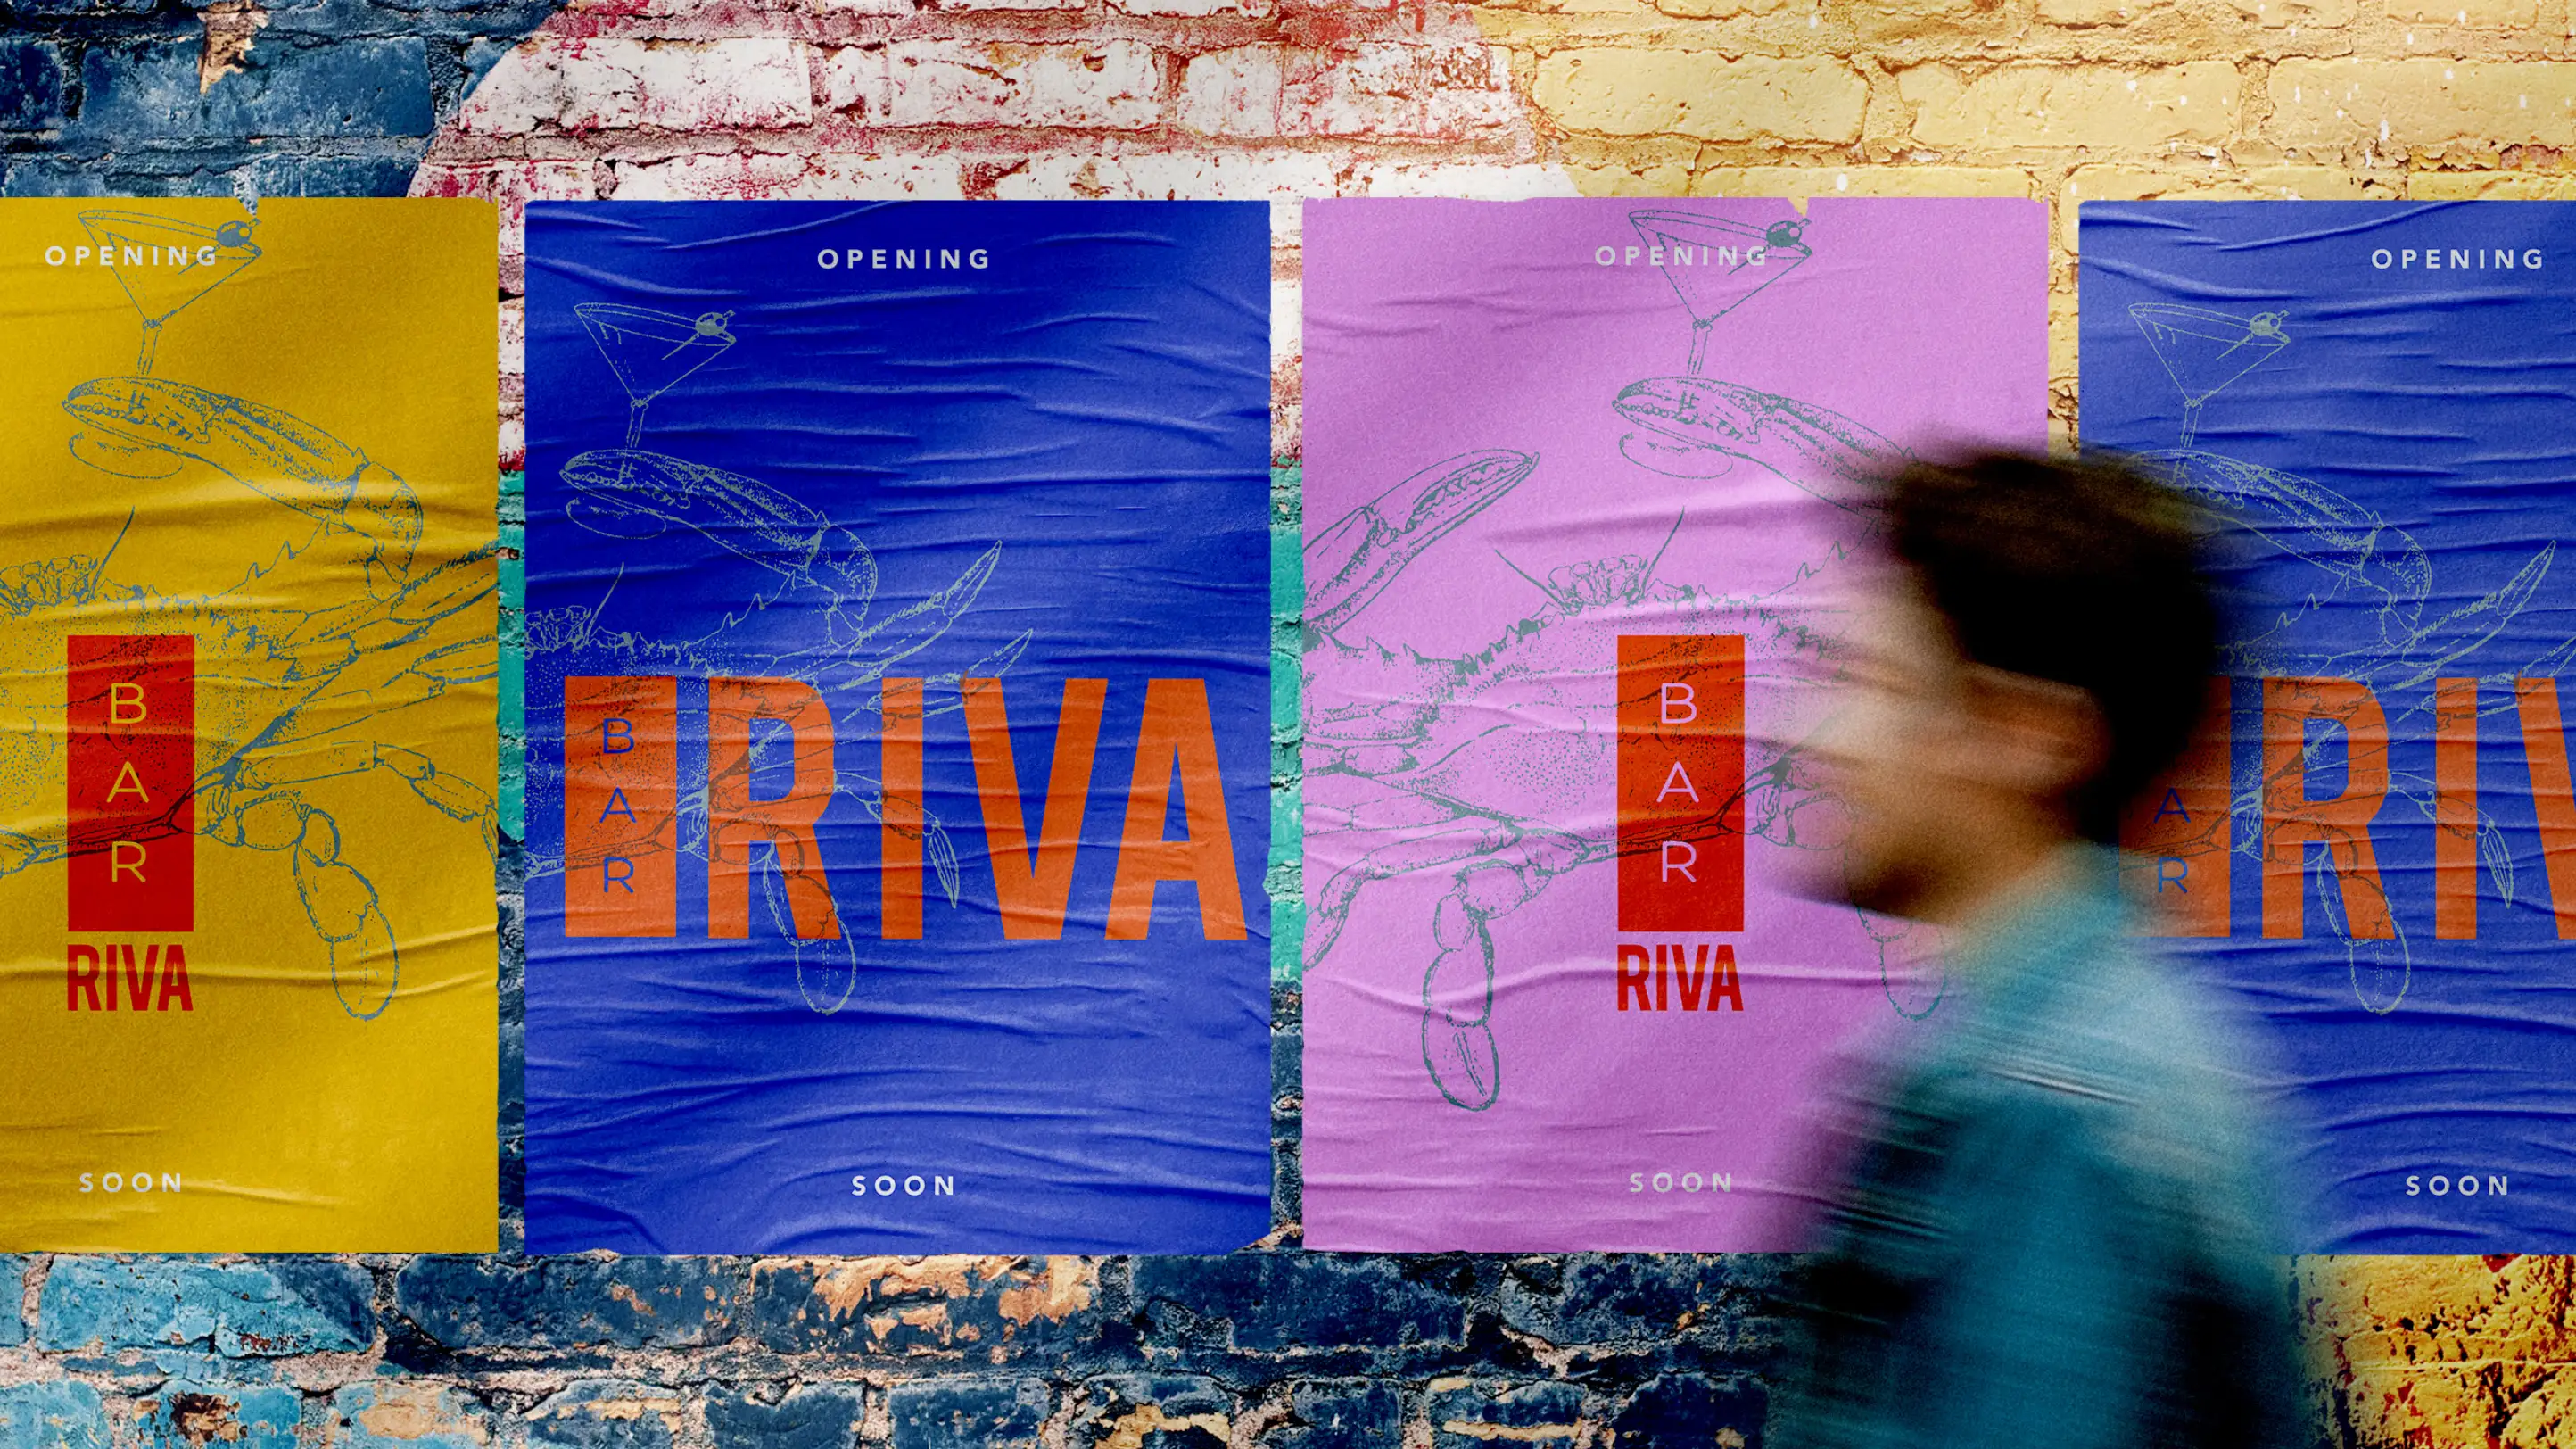 Bar Riva logo on colorful posters